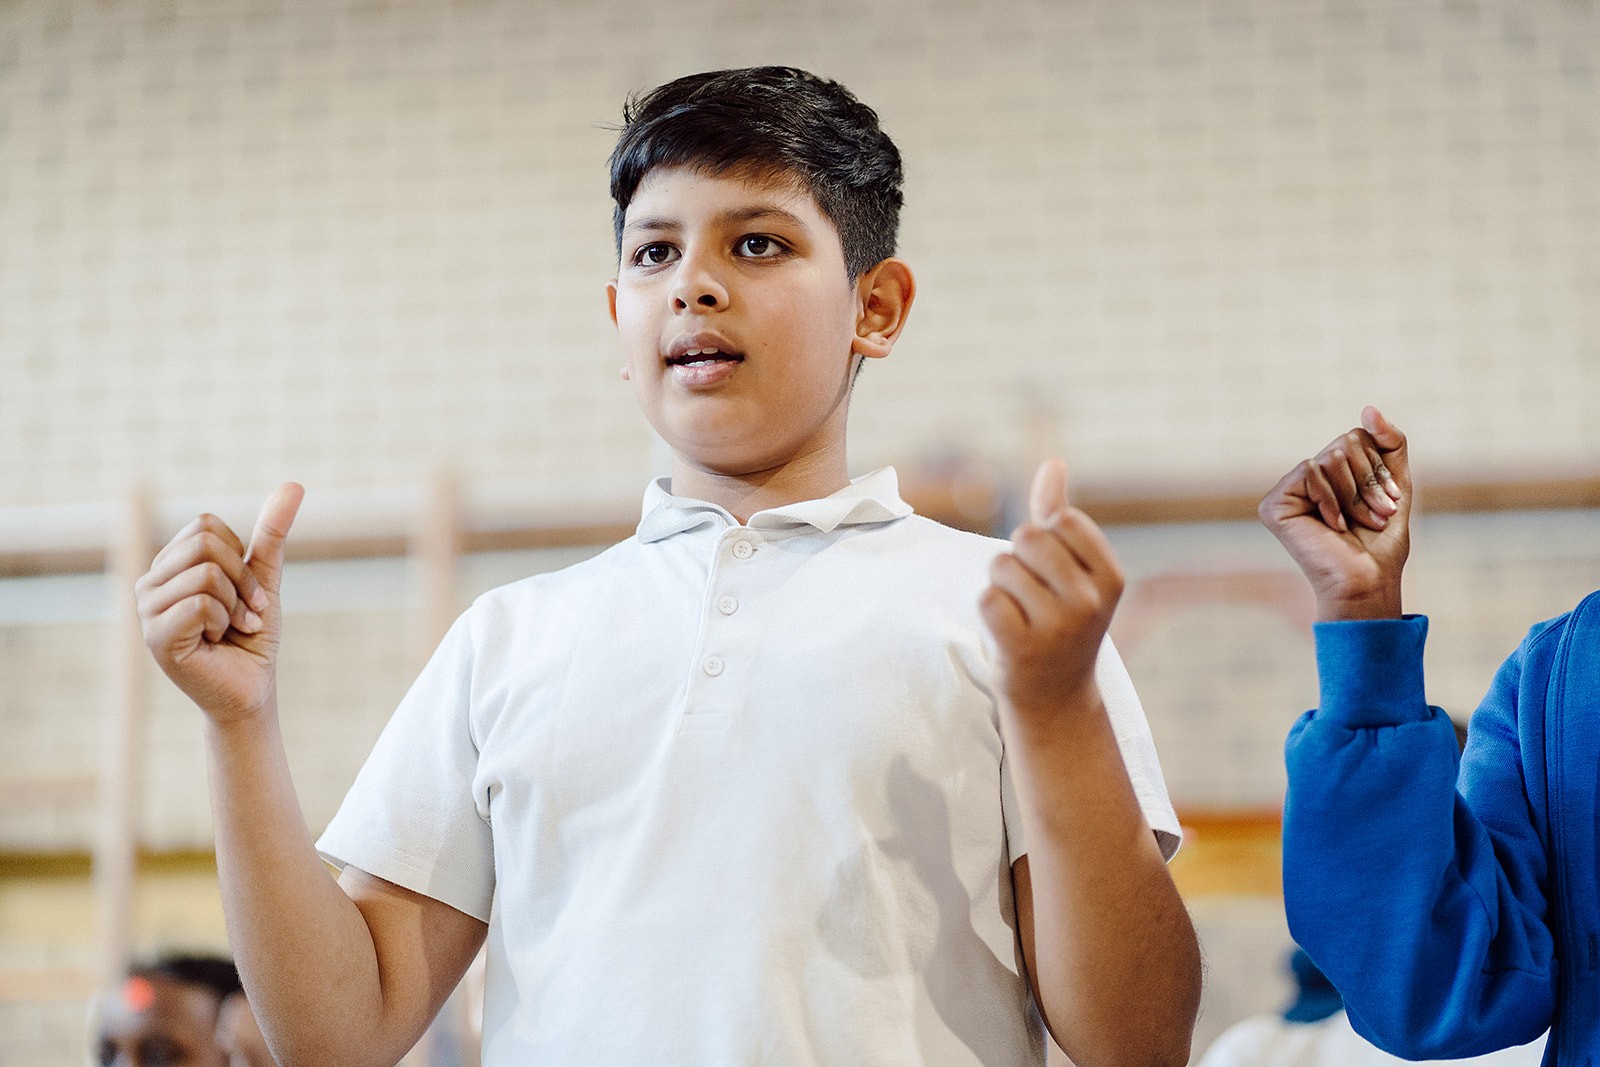 An older student clicking his fingers, is featured prominently in the foreground, wearing a school uniform with a white polo shirt. In the blurred background, classmates can be seen in the school hall, suggesting a lively singing assembly or performance. The image shows the positive impact that music is having on this student